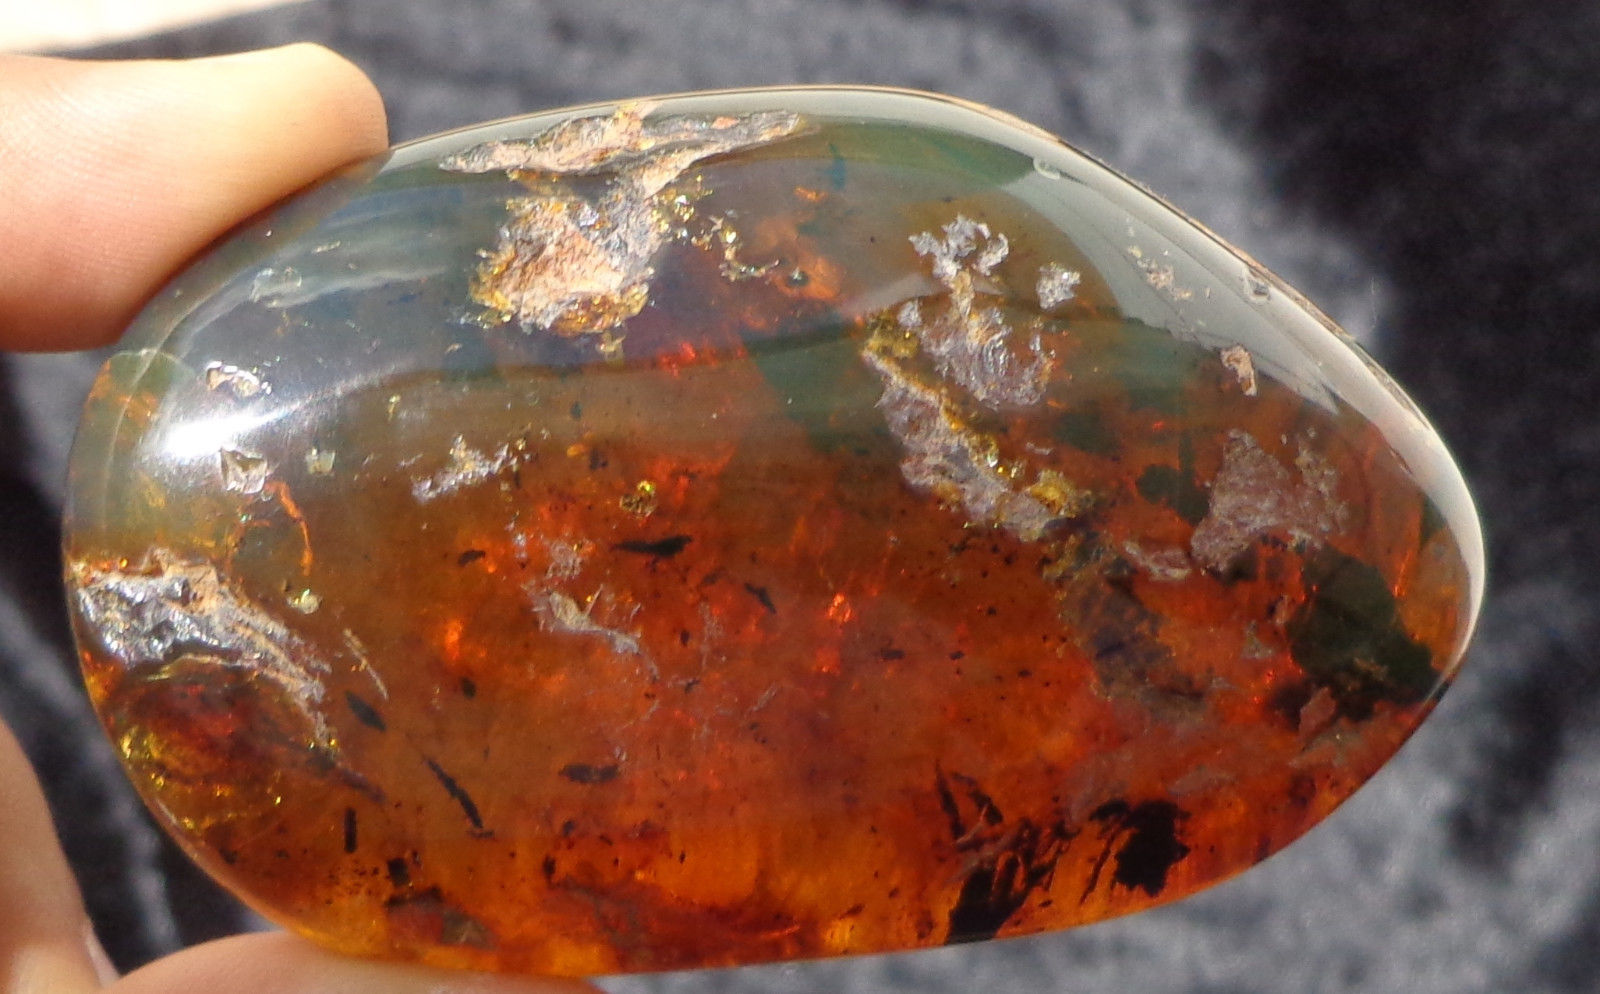 Blue Green Mexican Amber Resin Fossil Top Polished with Moss Inclusion -  Mayan Copal